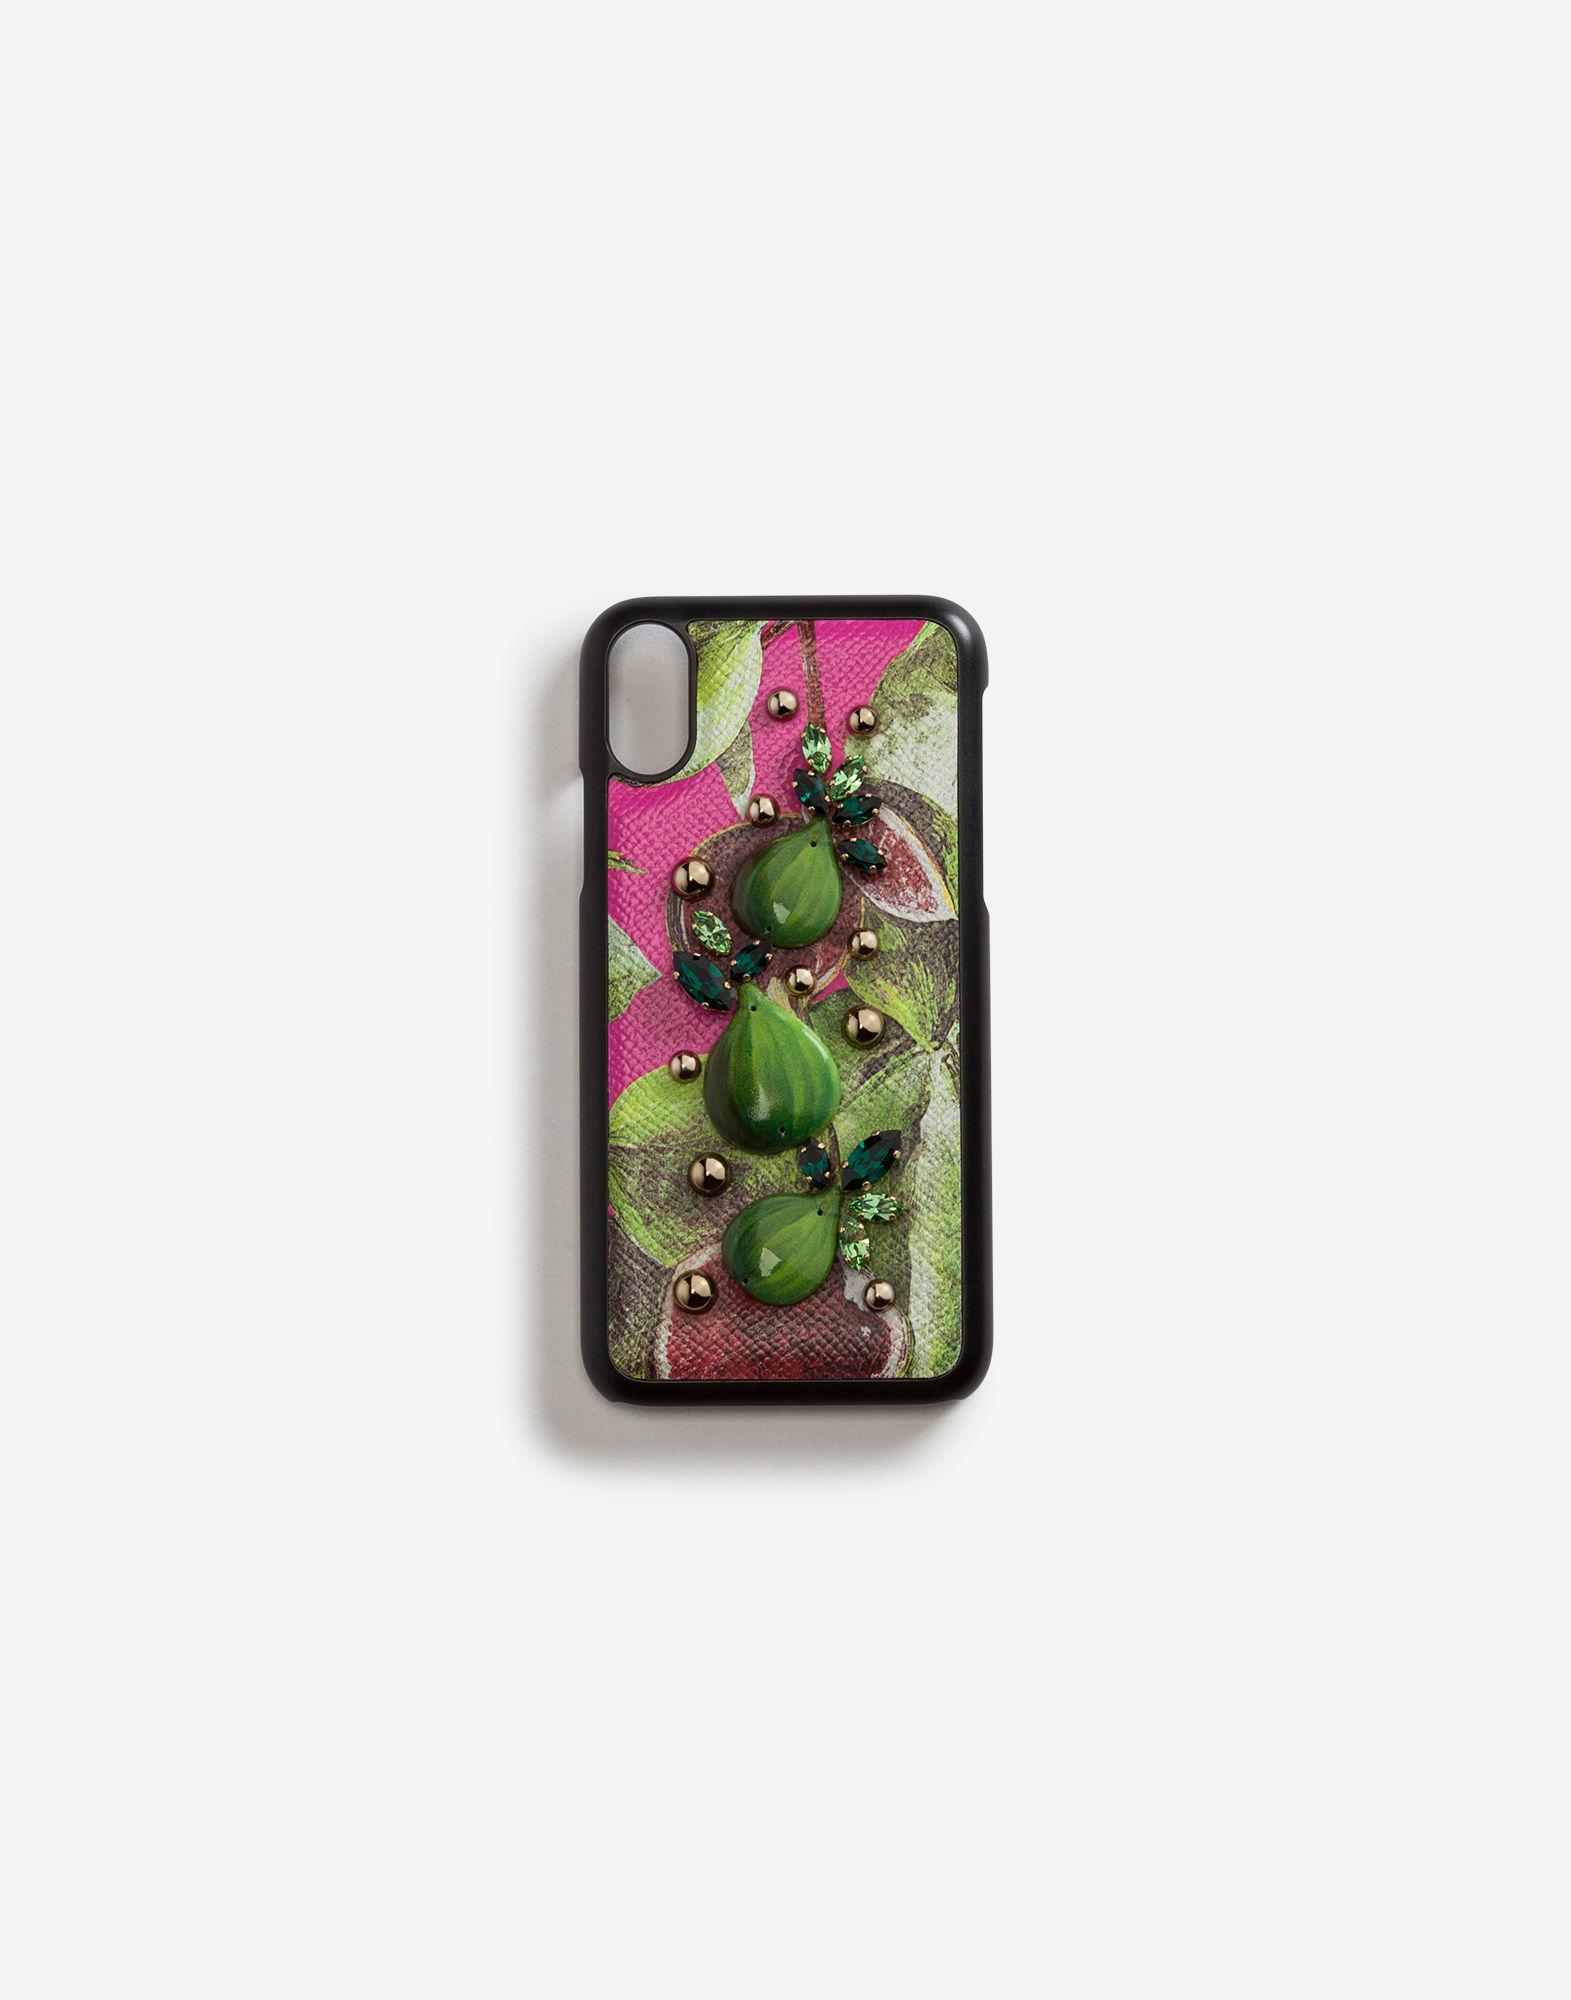 IPHONE X COVER WITH PRINTED DAUPHINE CALFSKIN DETAIL AND EMBROIDERIES